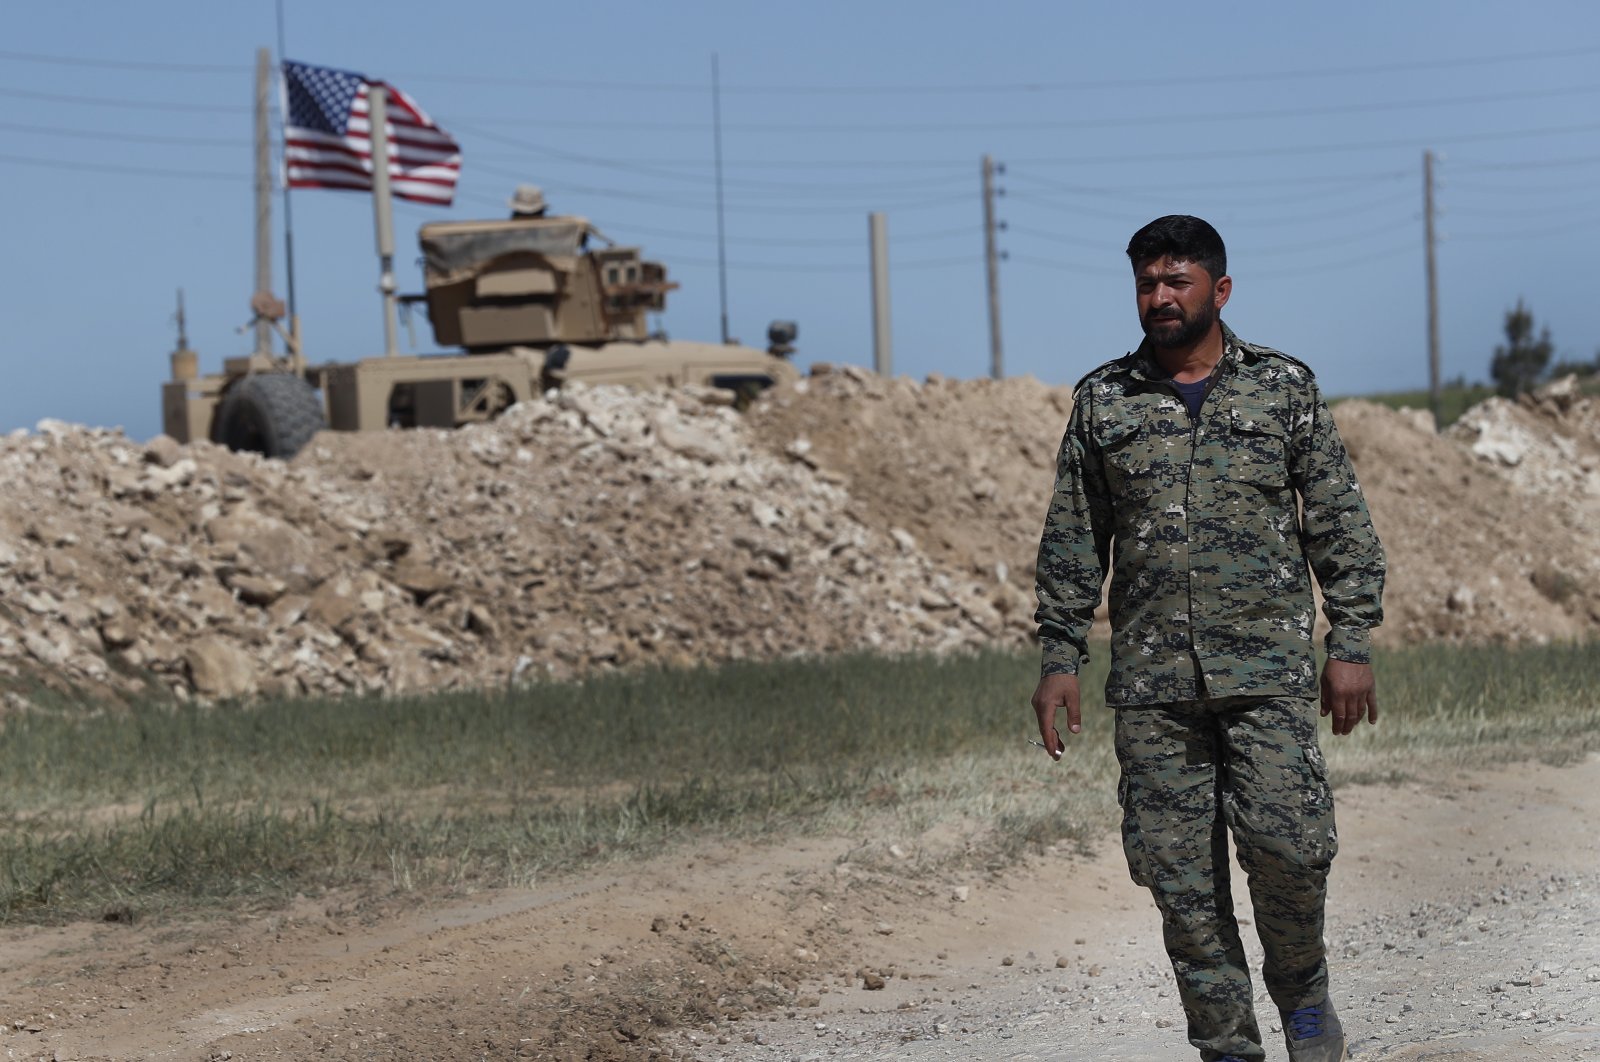 A YPG member passes a U.S. position in Manbij, Syria, on April 4, 2018. (AP Photo)